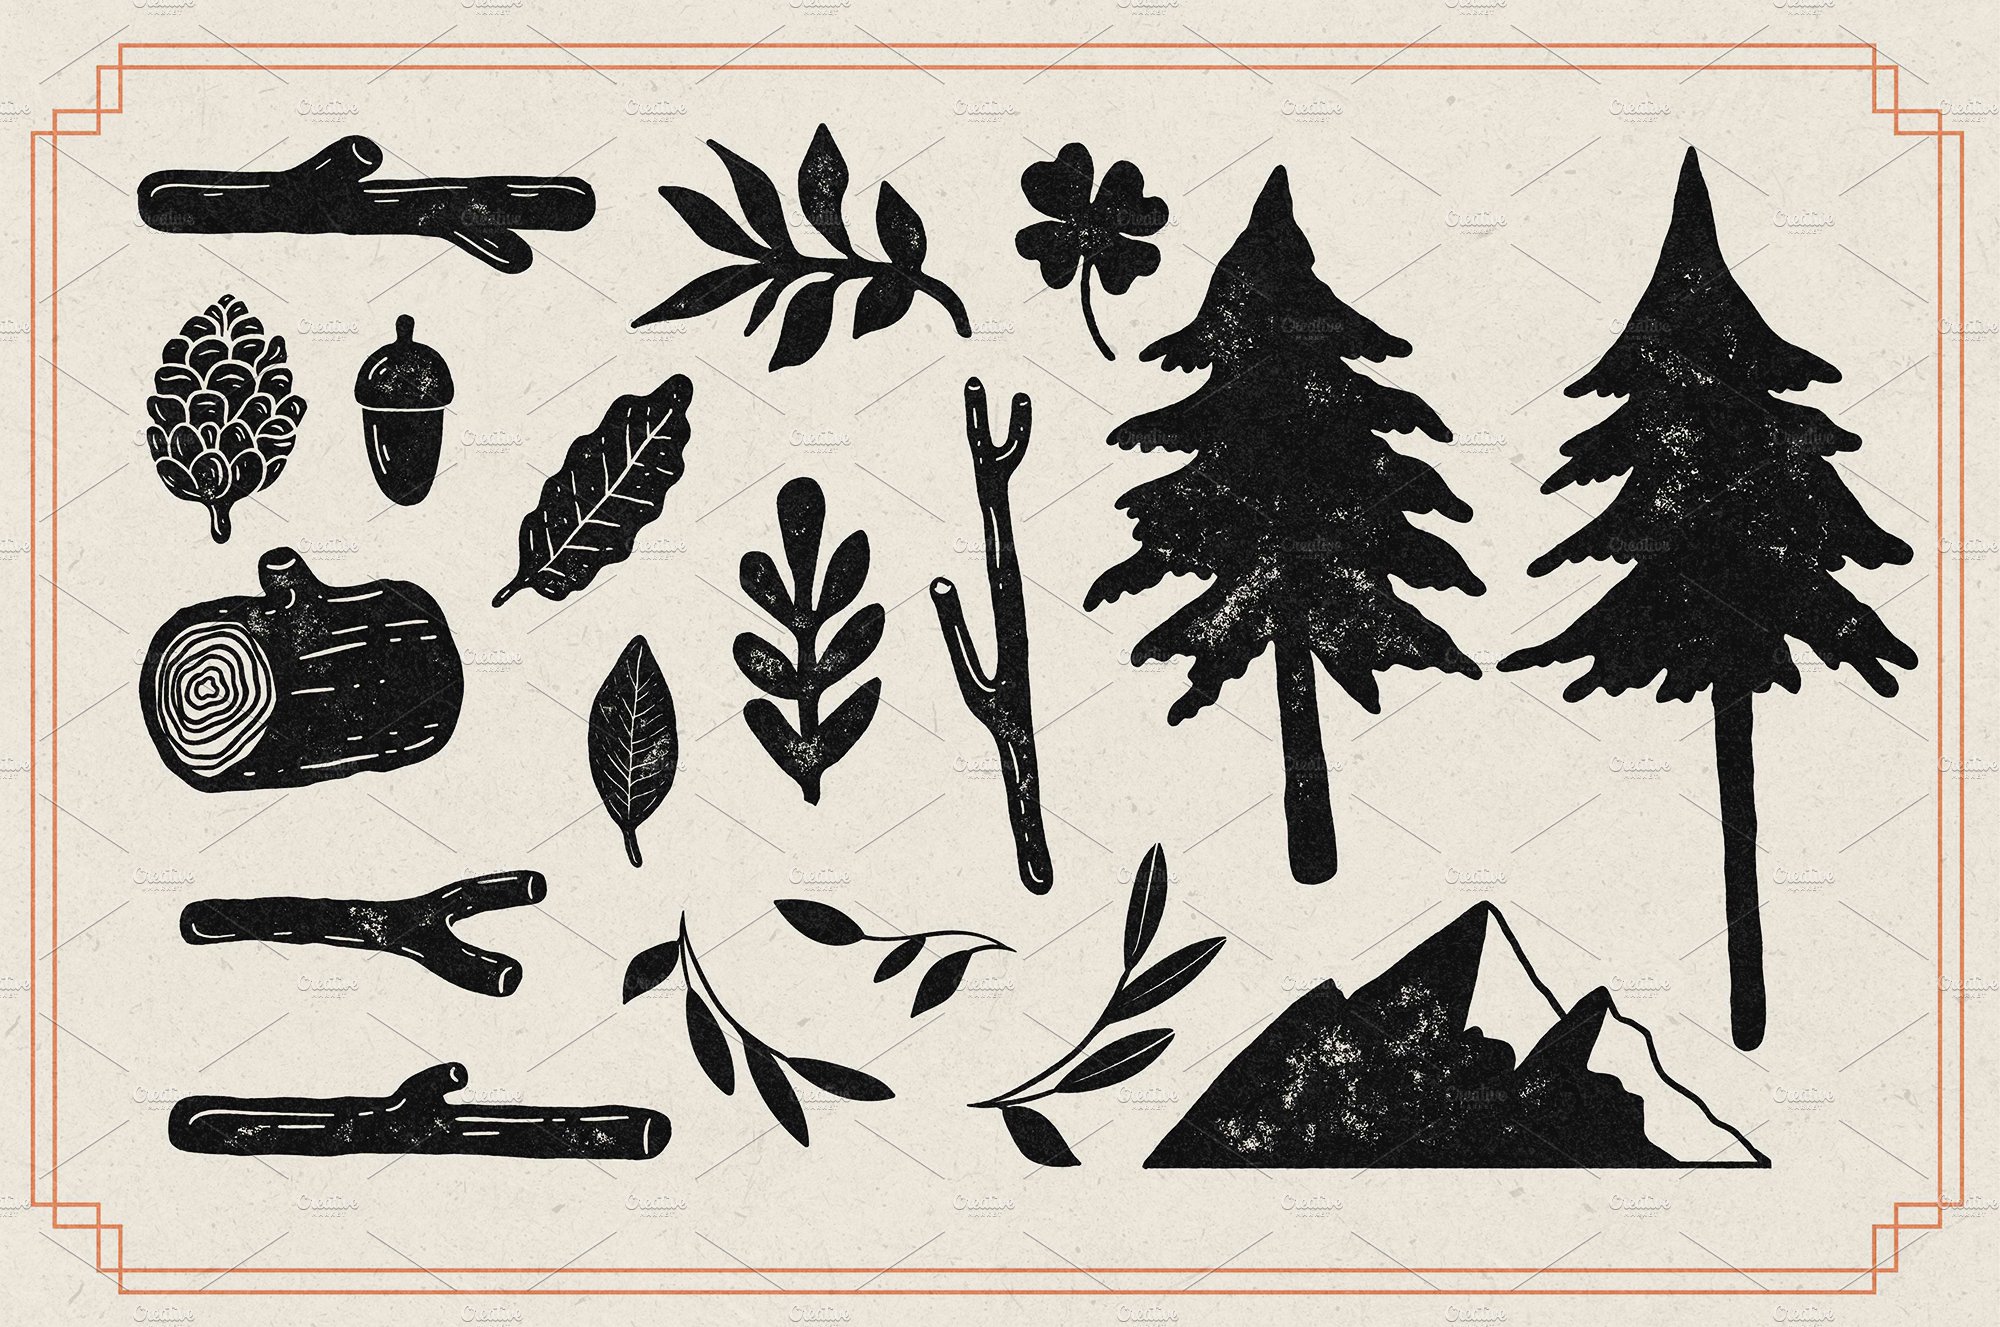 Various of black forest elements.